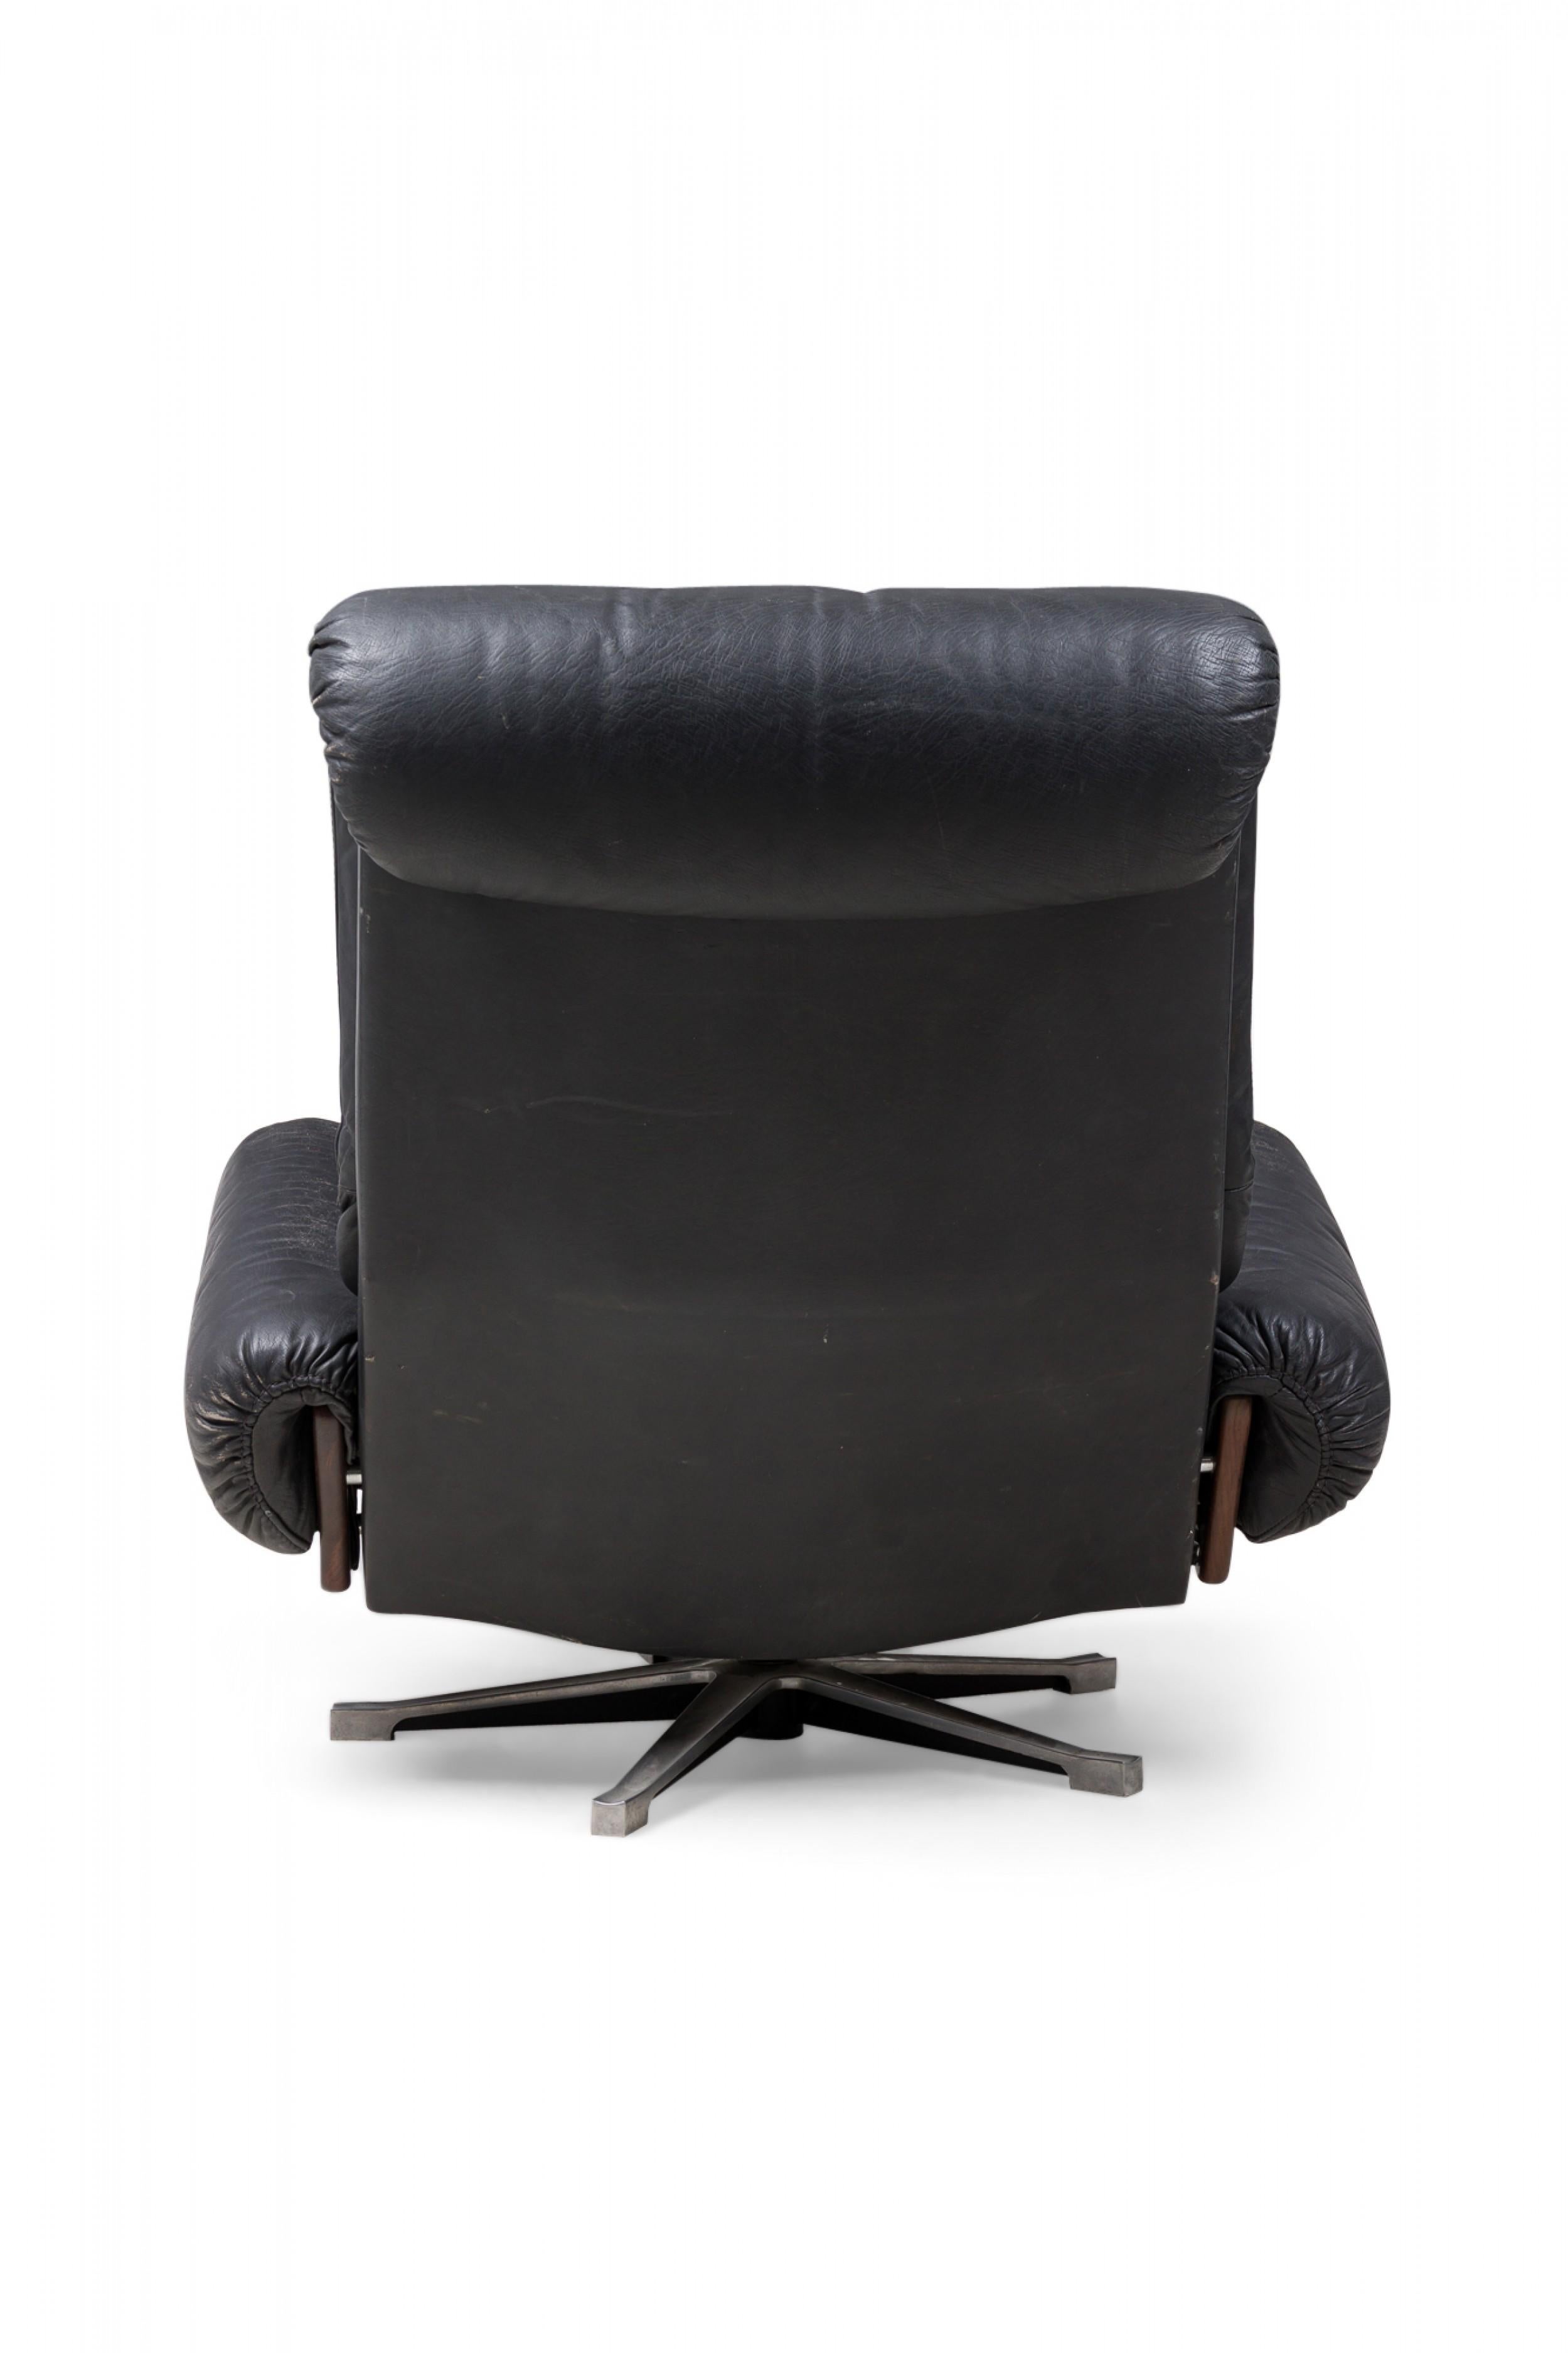 Desede Midcentury Swiss Metal & Black Leather Upholstered Swivel Chair For Sale 1